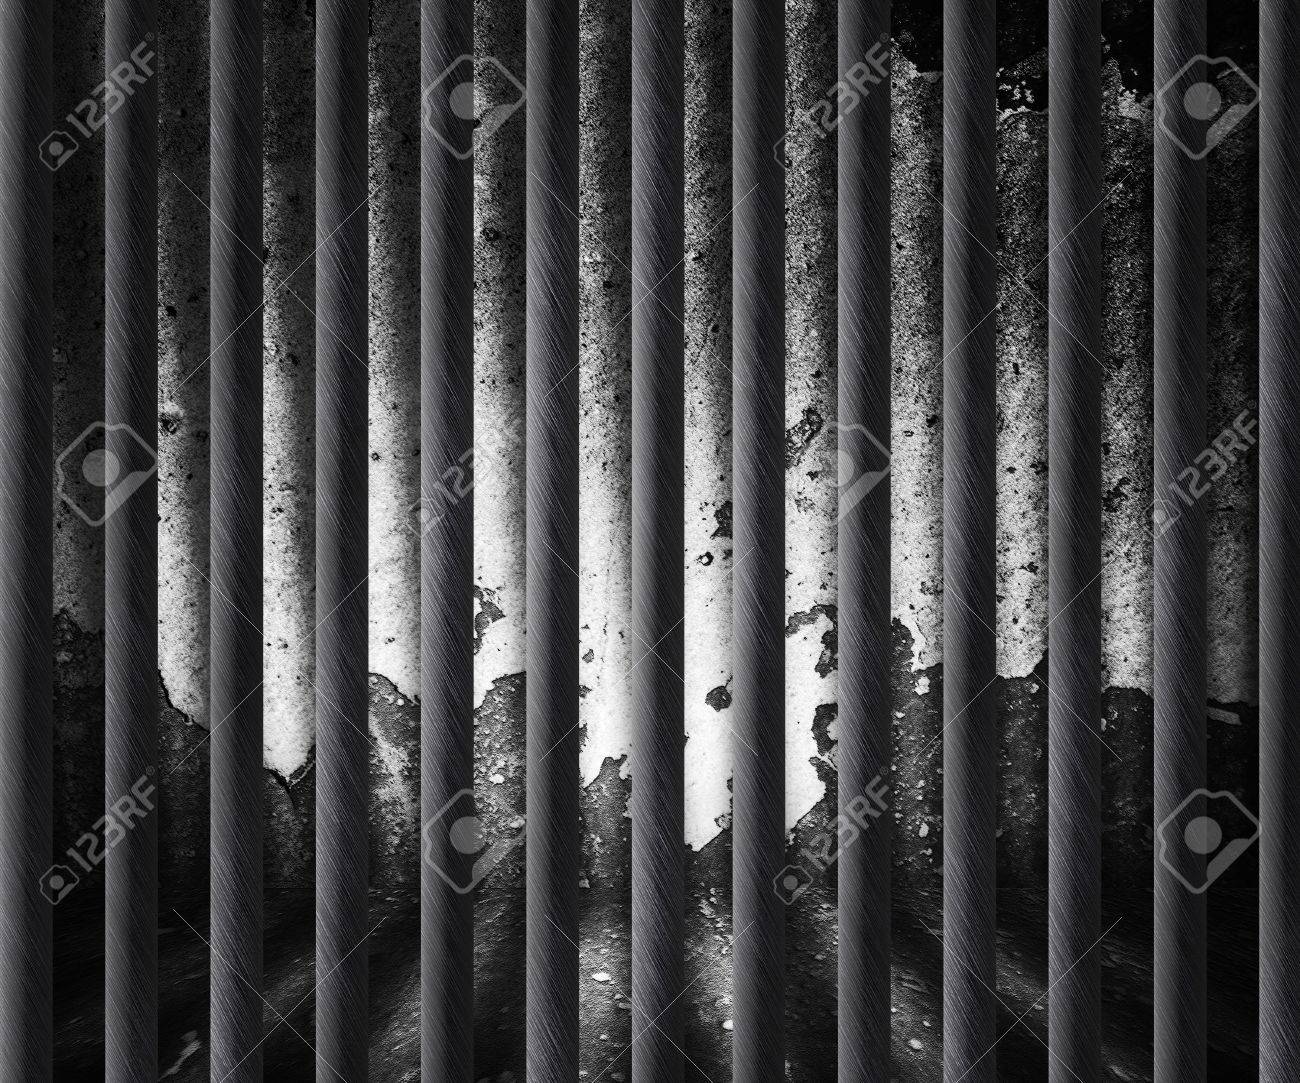 Dark Prison Cell Background Stock Photo Picture And Royalty